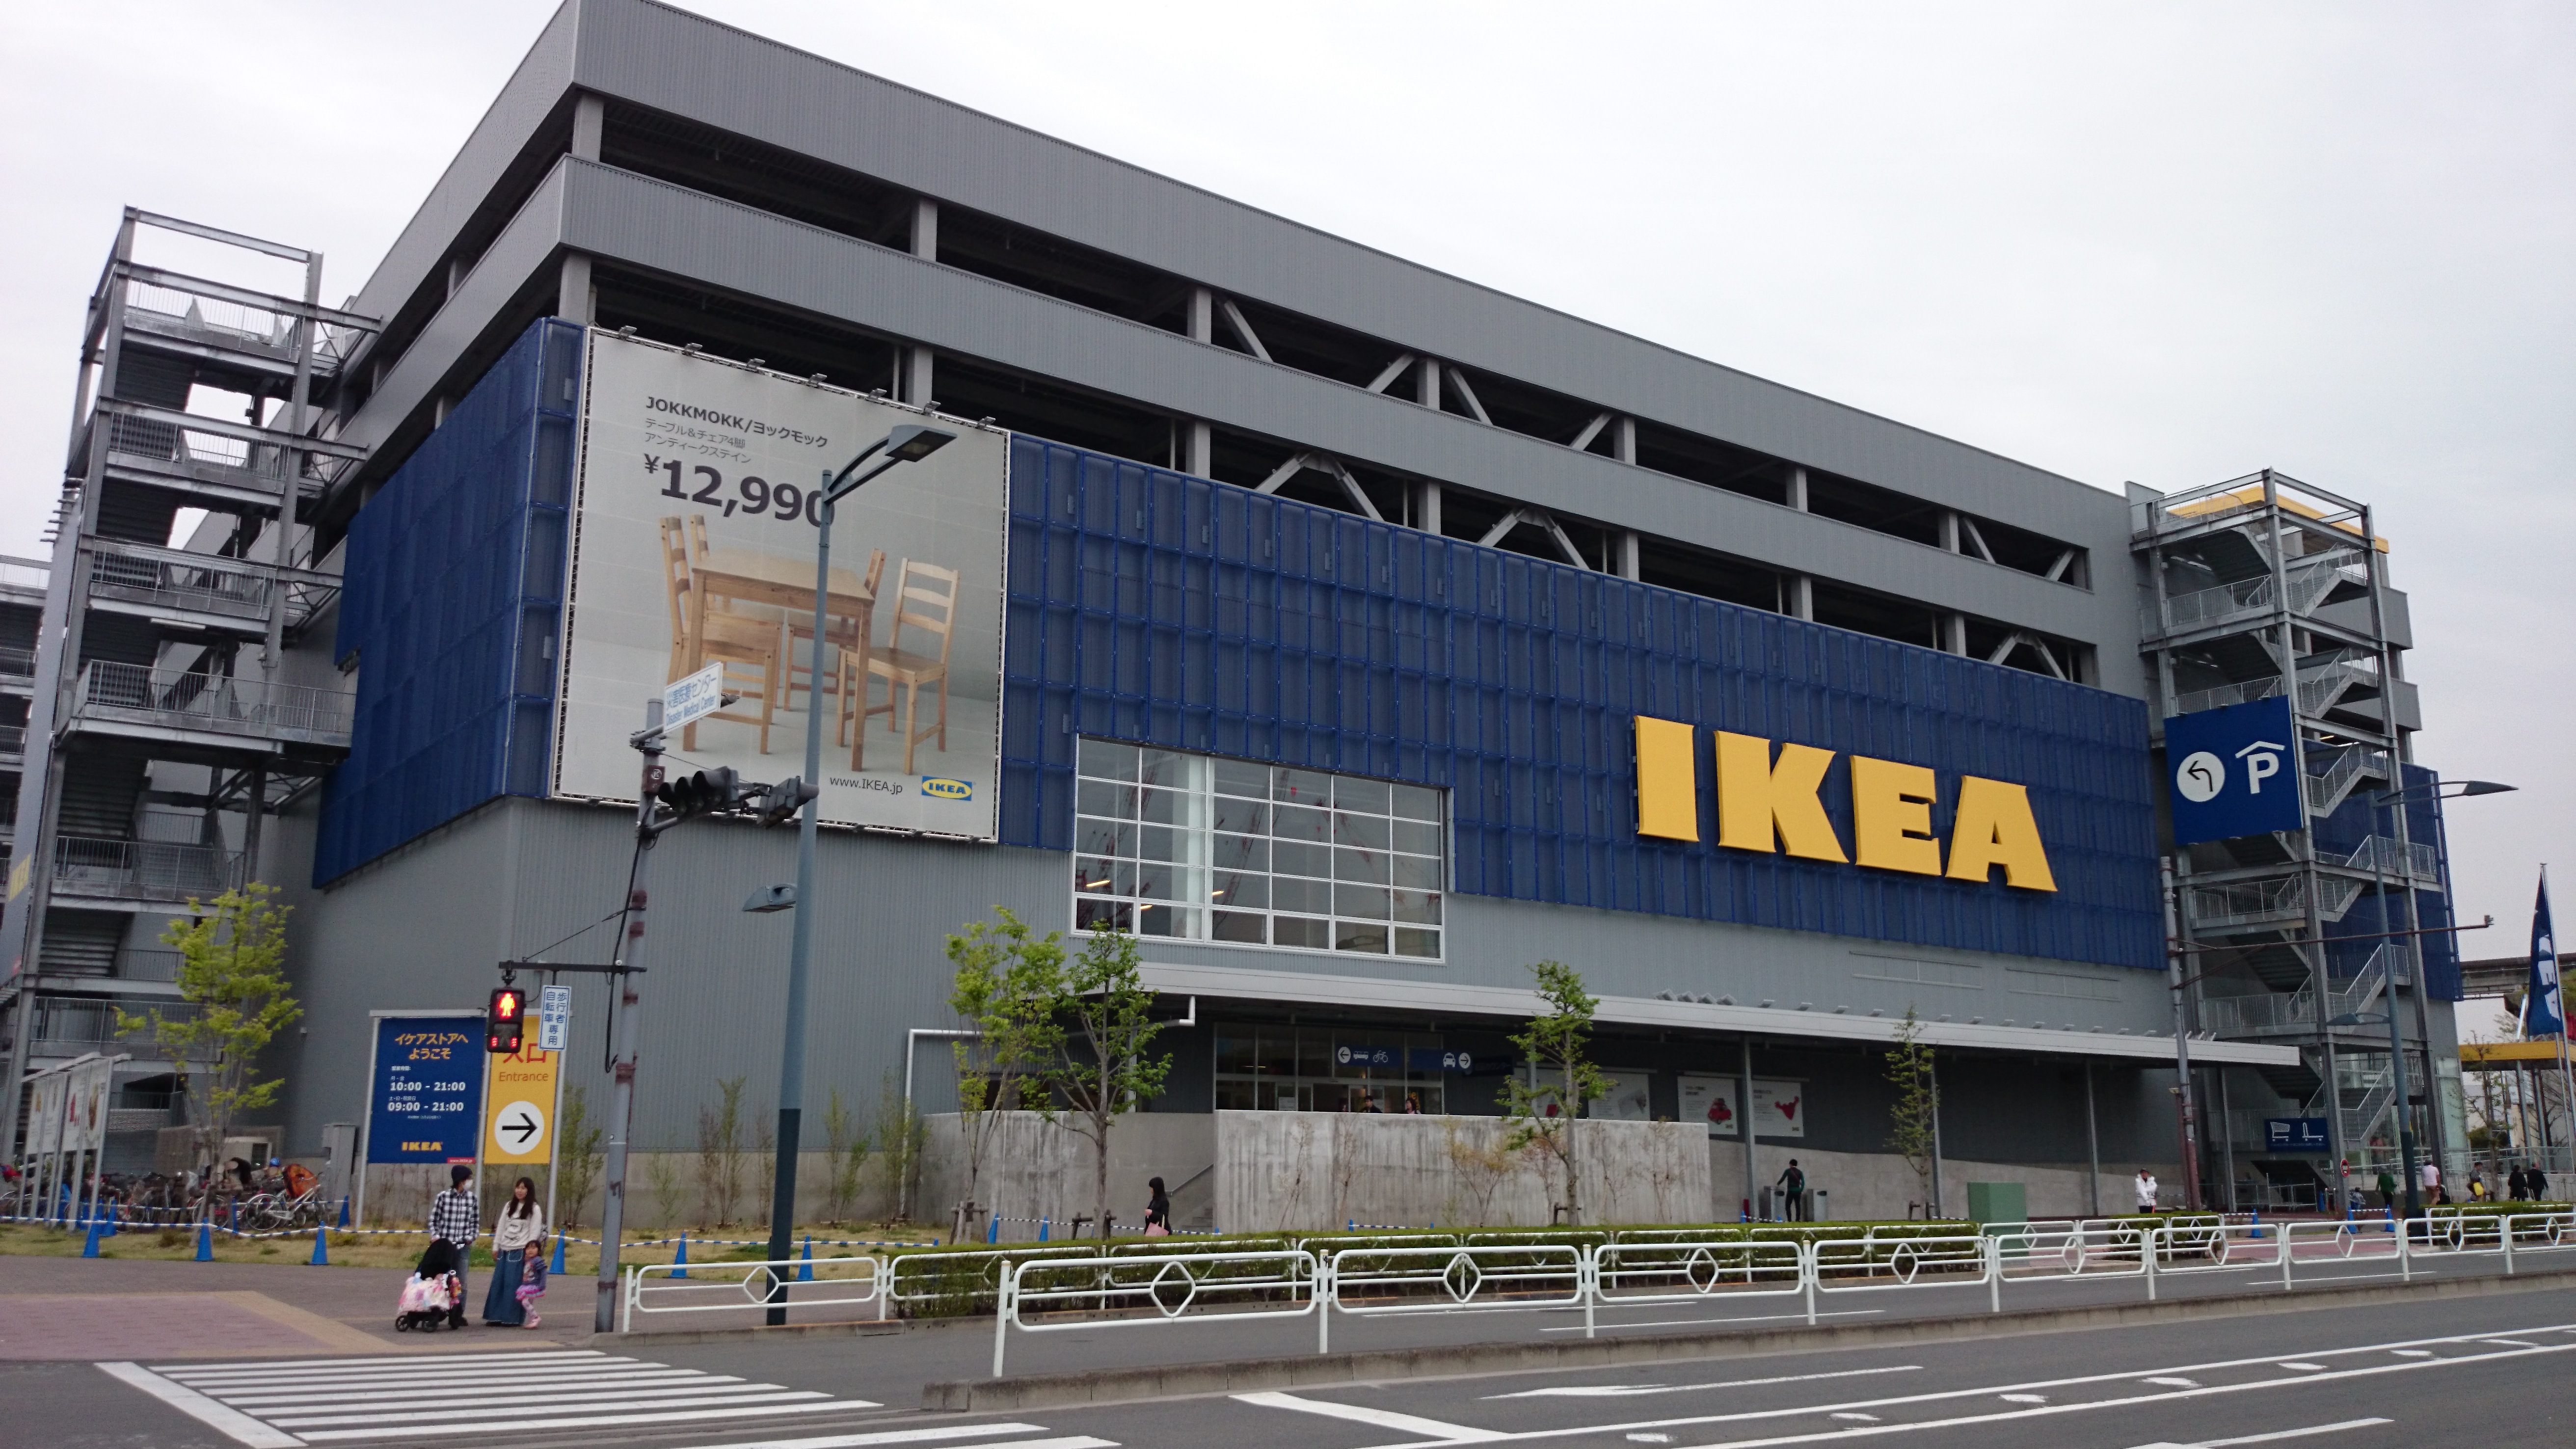 Ikea open for the growing middle-class in India